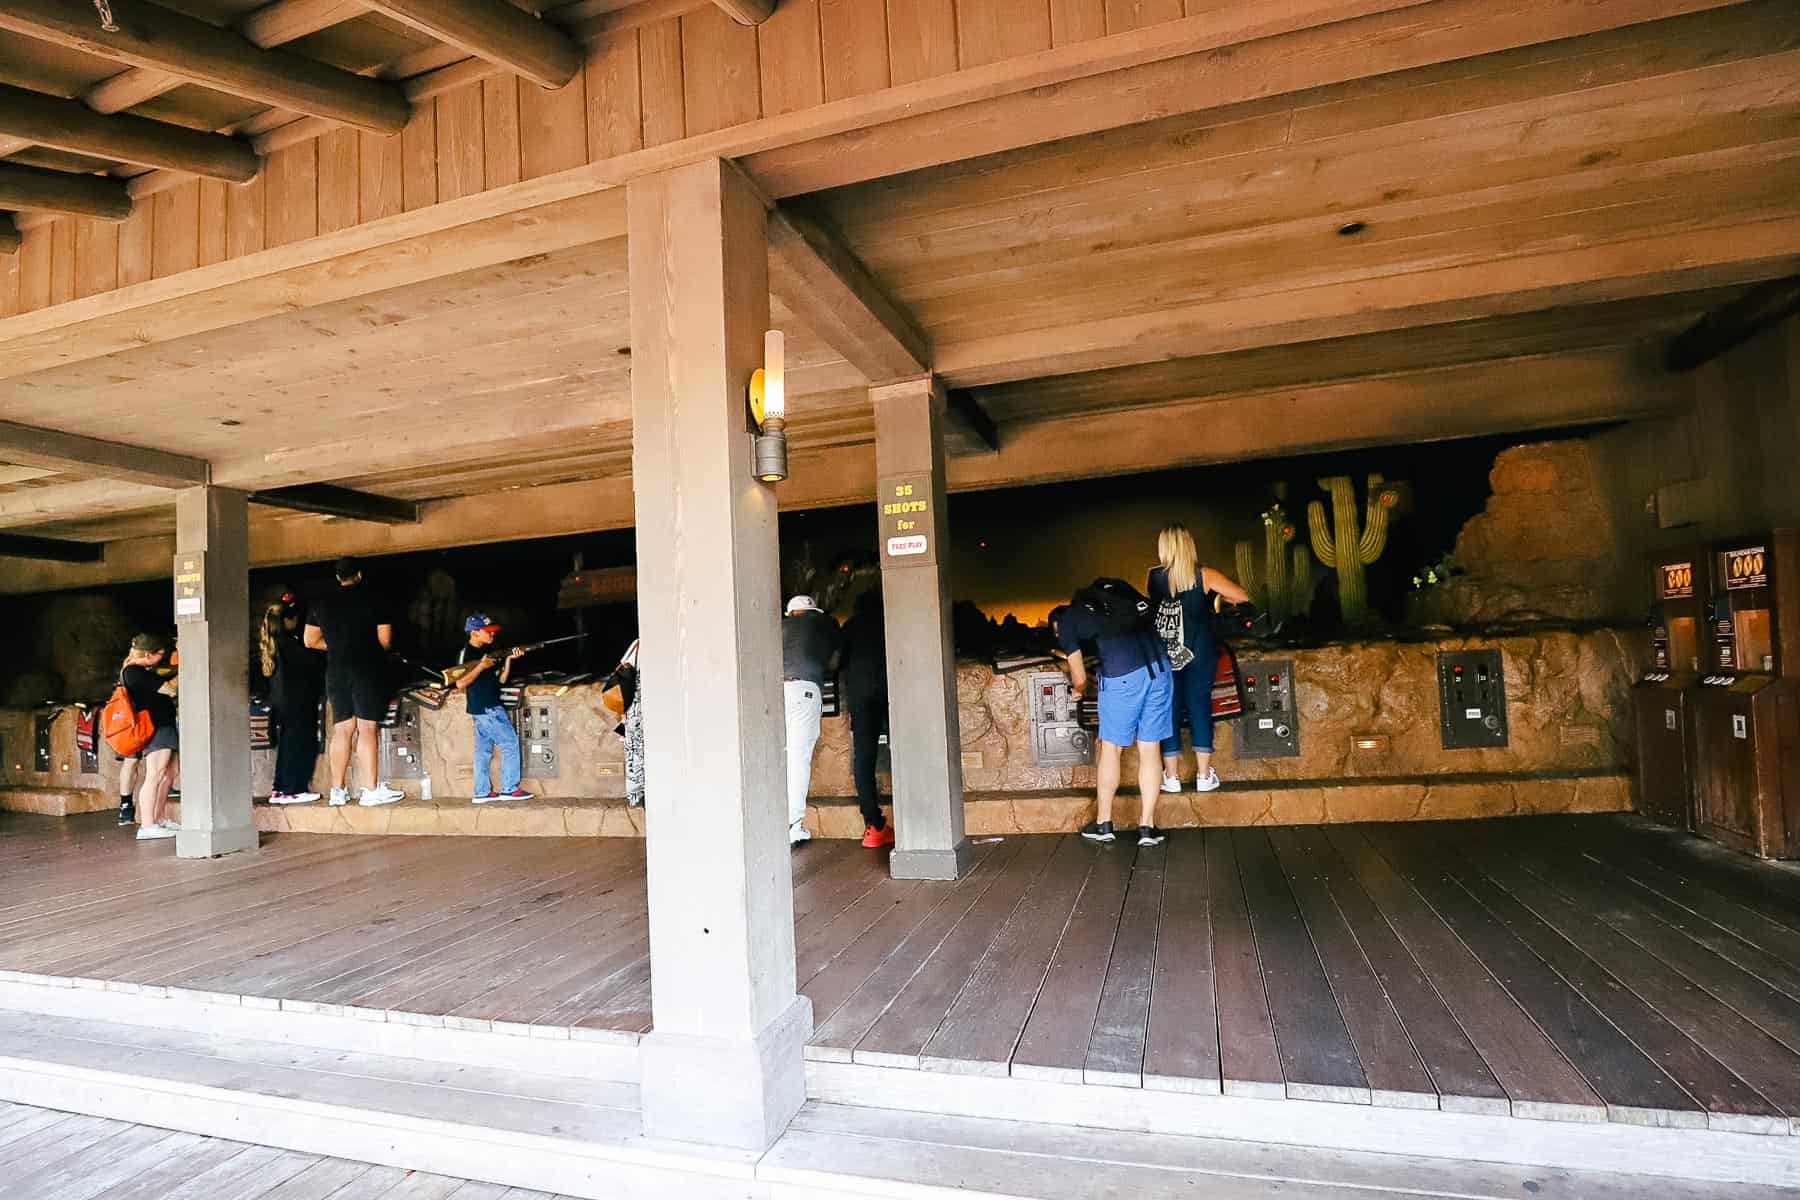 Guests participating in the shooting range at Frontierland Shootin' Arcade. 